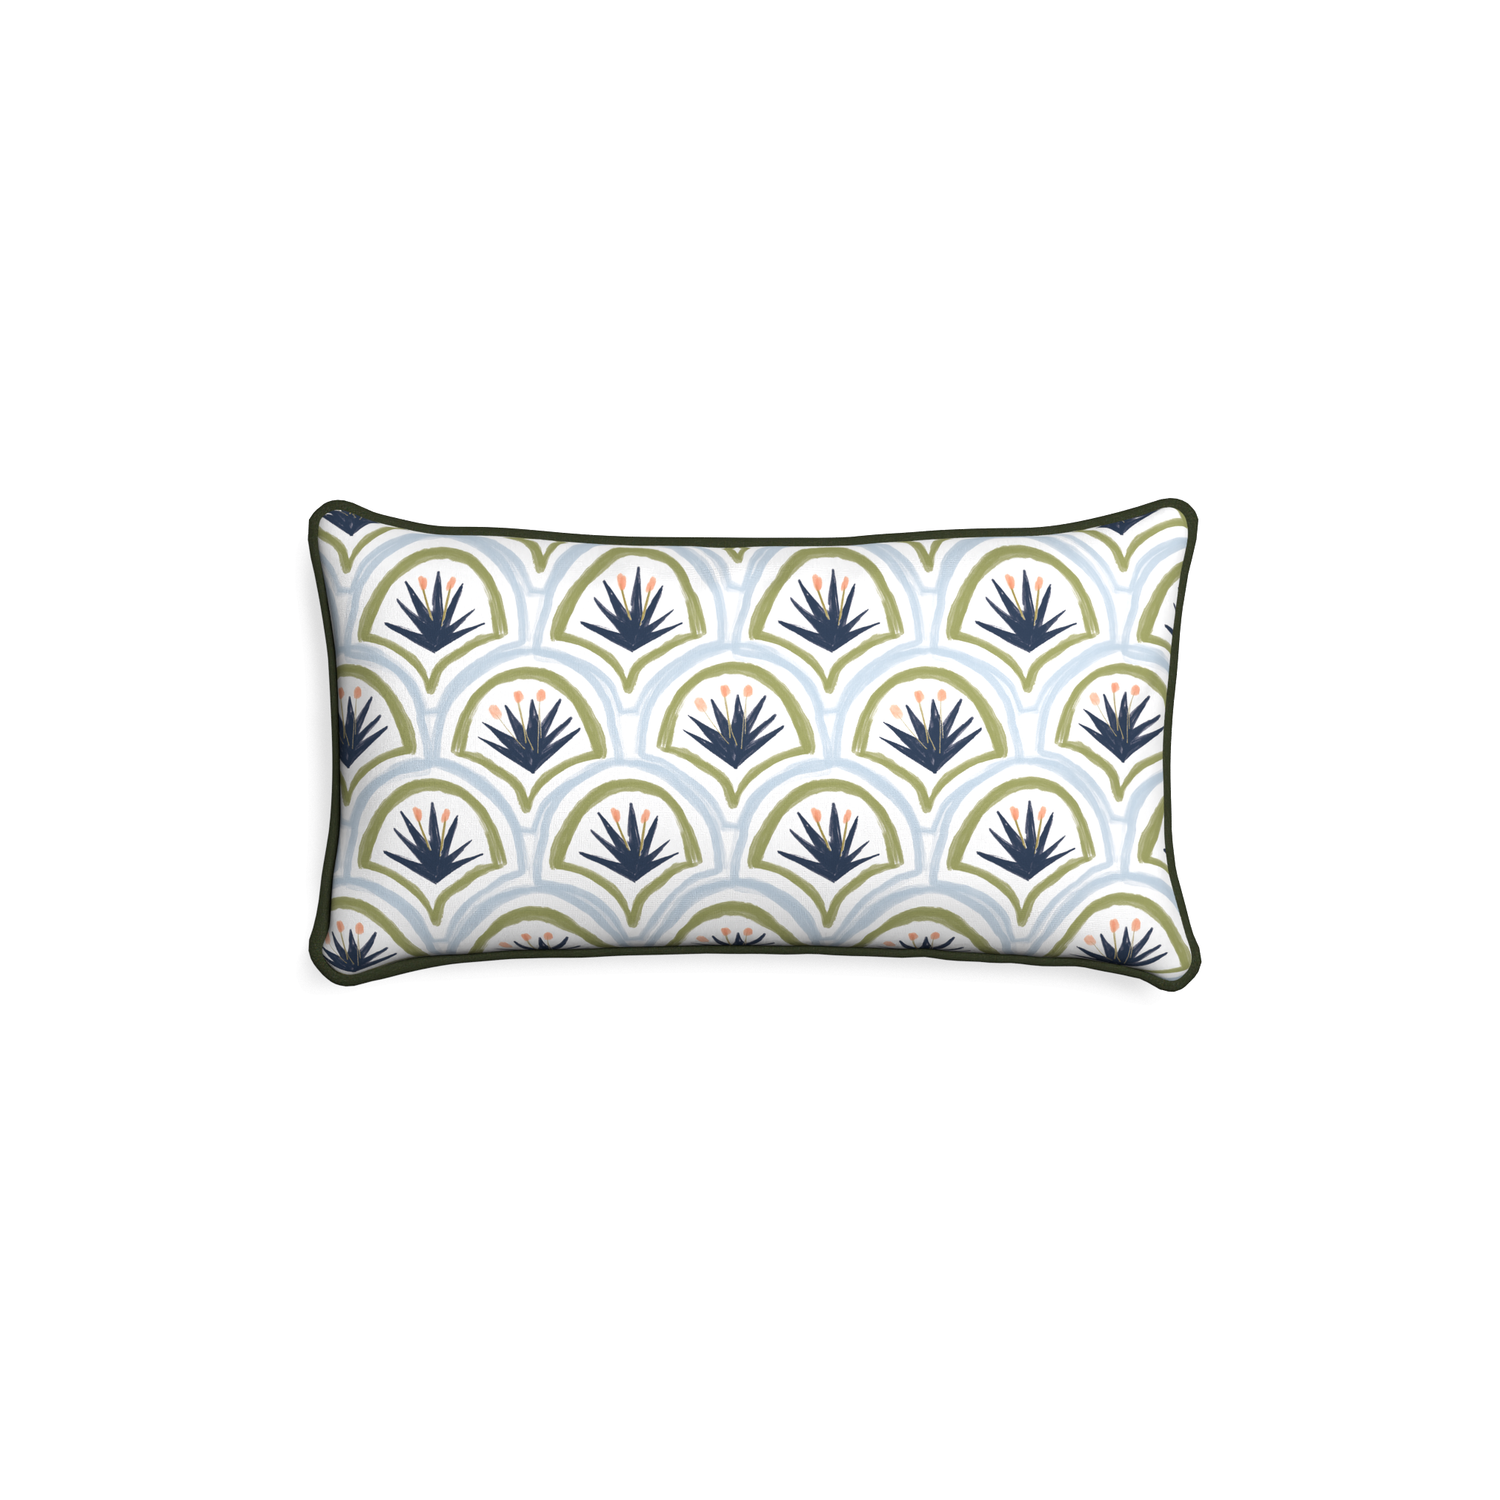 Petite-lumbar thatcher midnight custom art deco palm patternpillow with f piping on white background